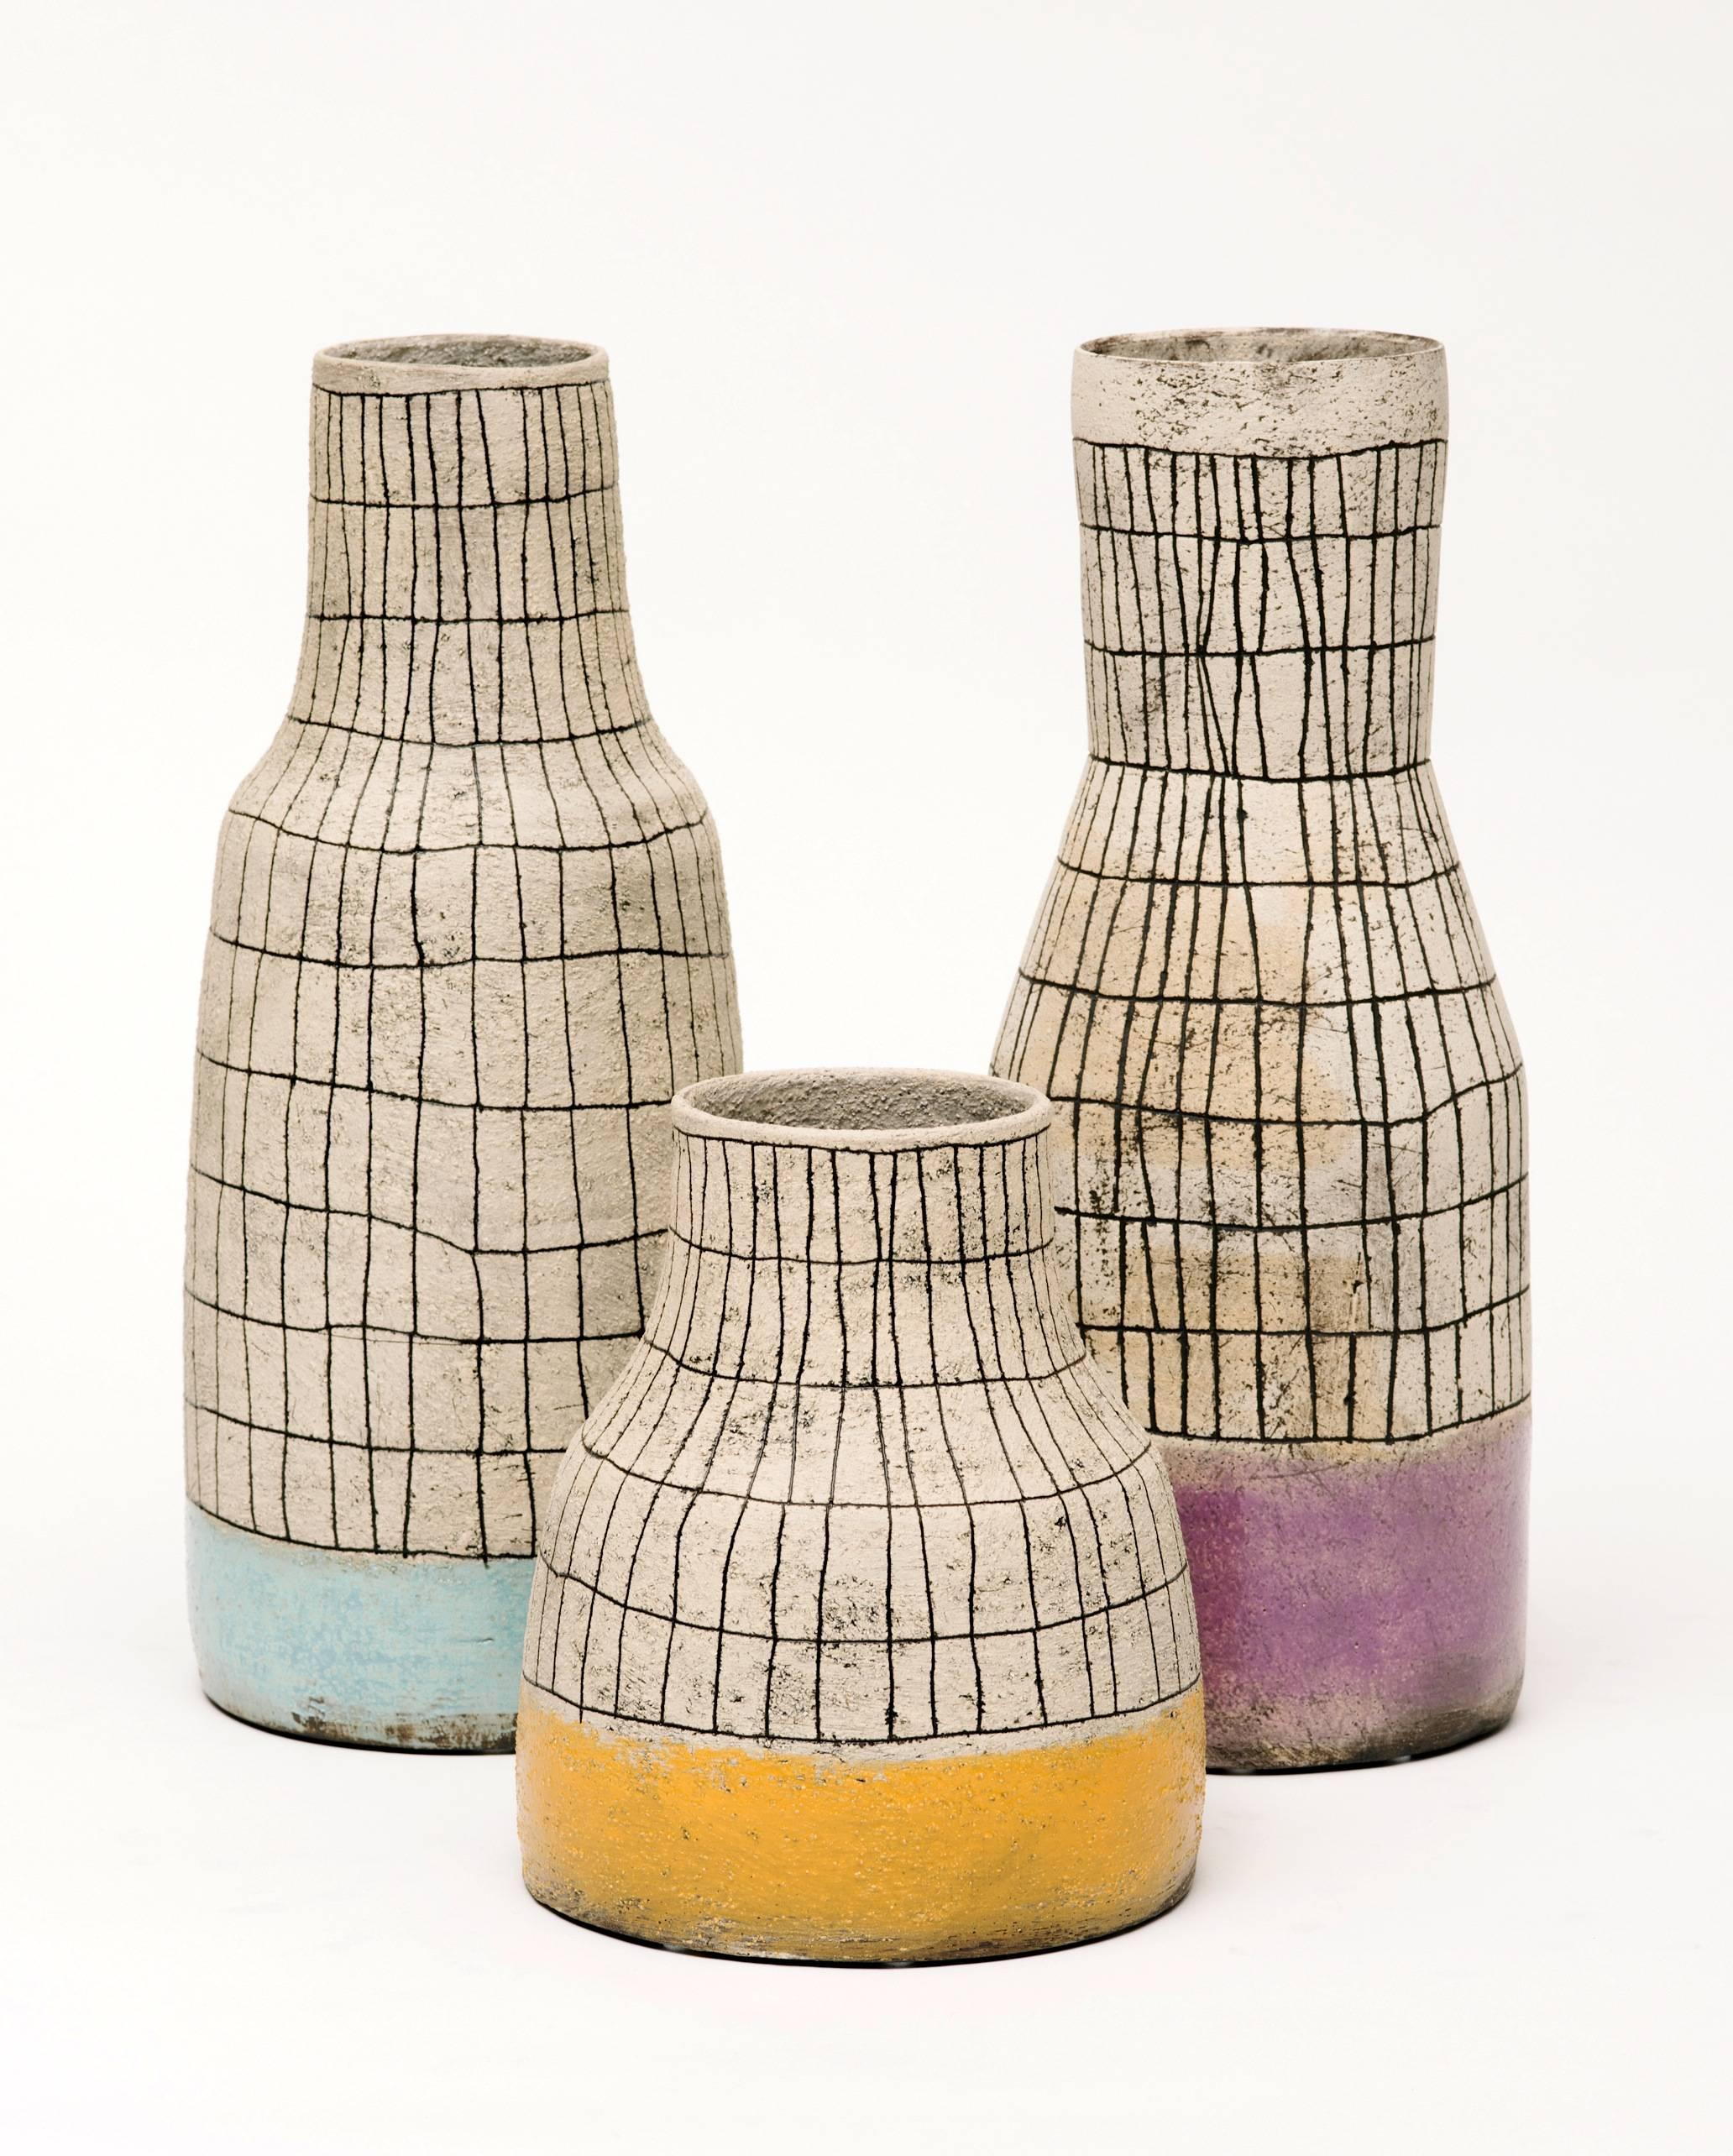 American Contemporary Hand-Painted Ceramic Vases with a Mid Century Design